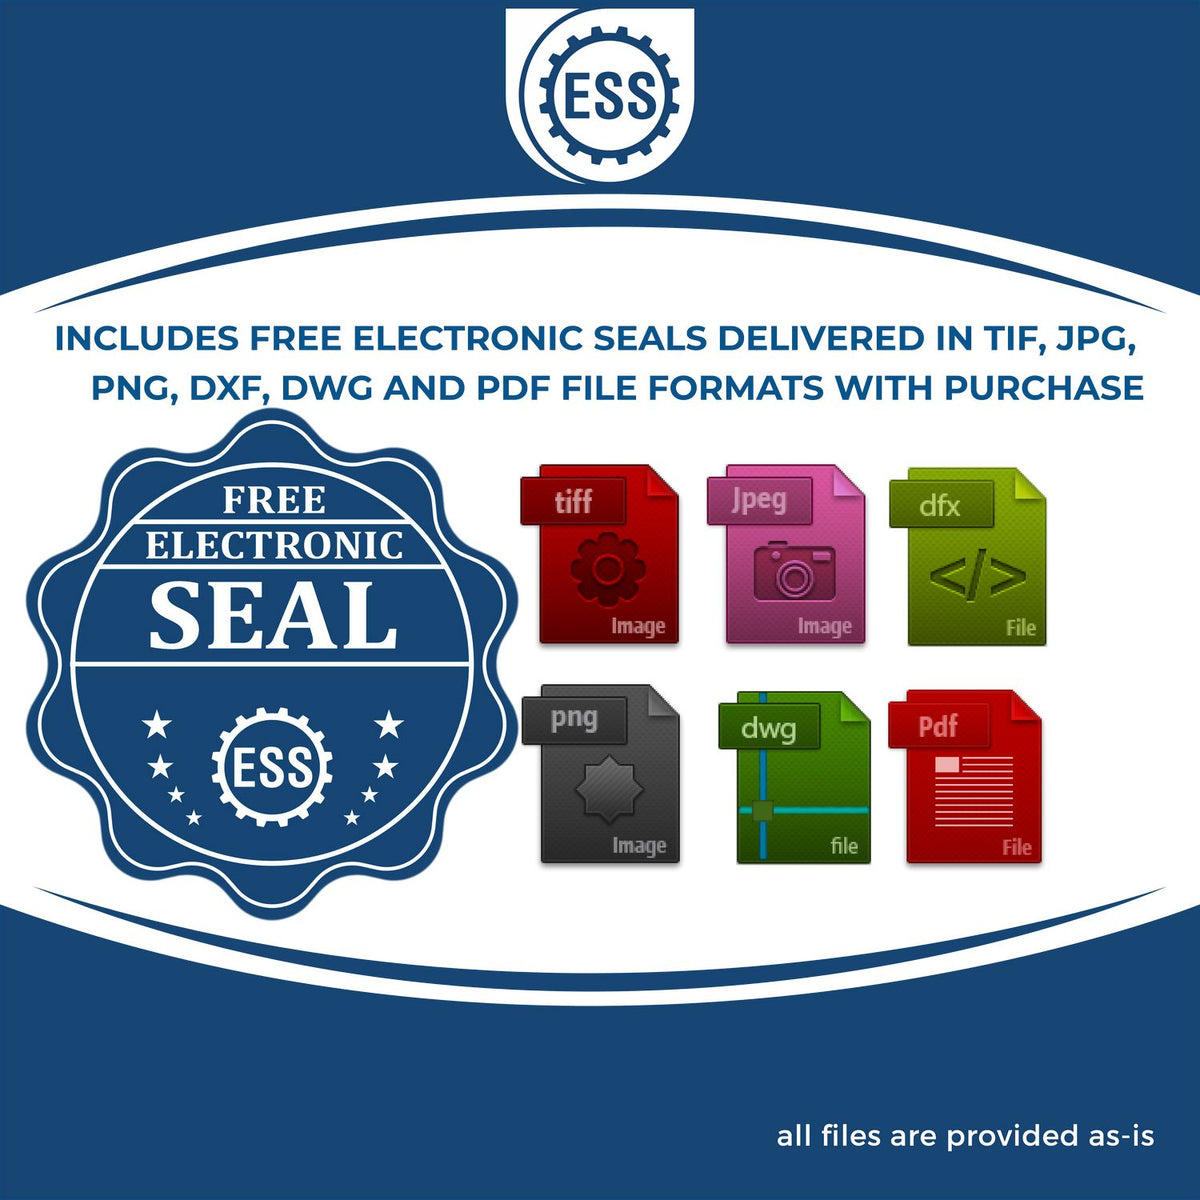 An infographic for the free electronic seal for the Hybrid Indiana Engineer Seal illustrating the different file type icons such as DXF, DWG, TIF, JPG and PNG.